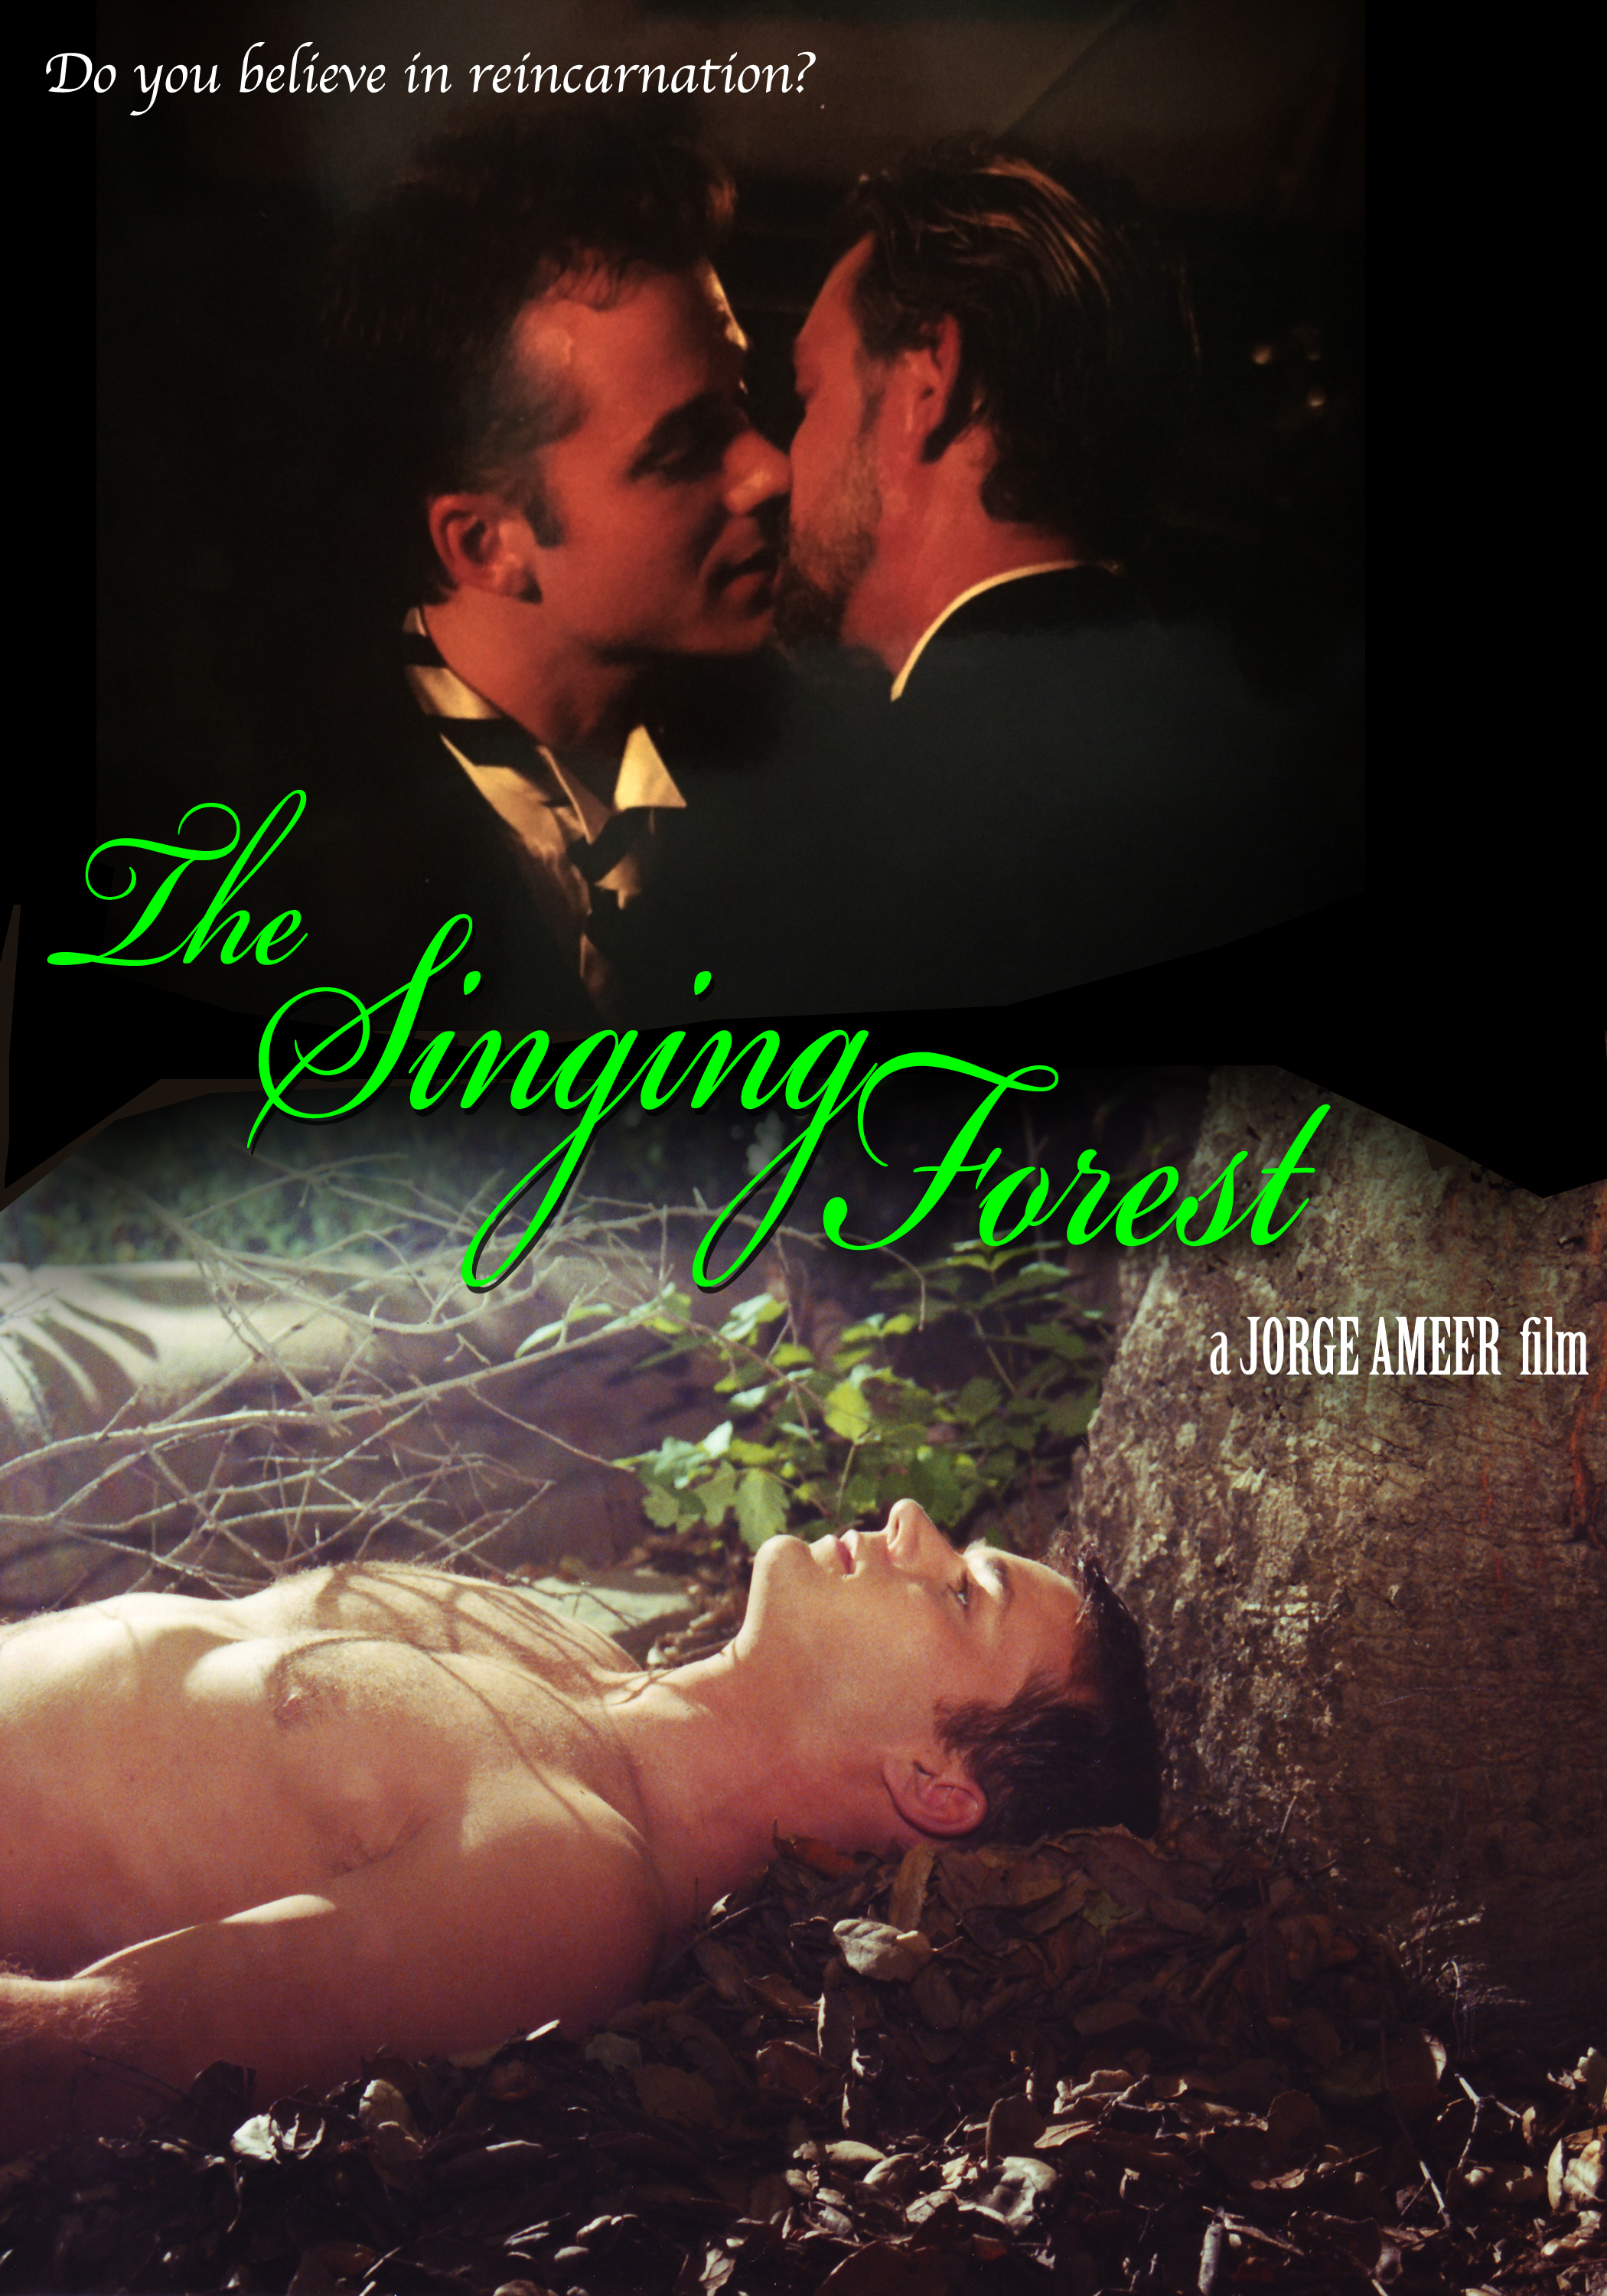 The Singing Forest (2003) Screenshot 1